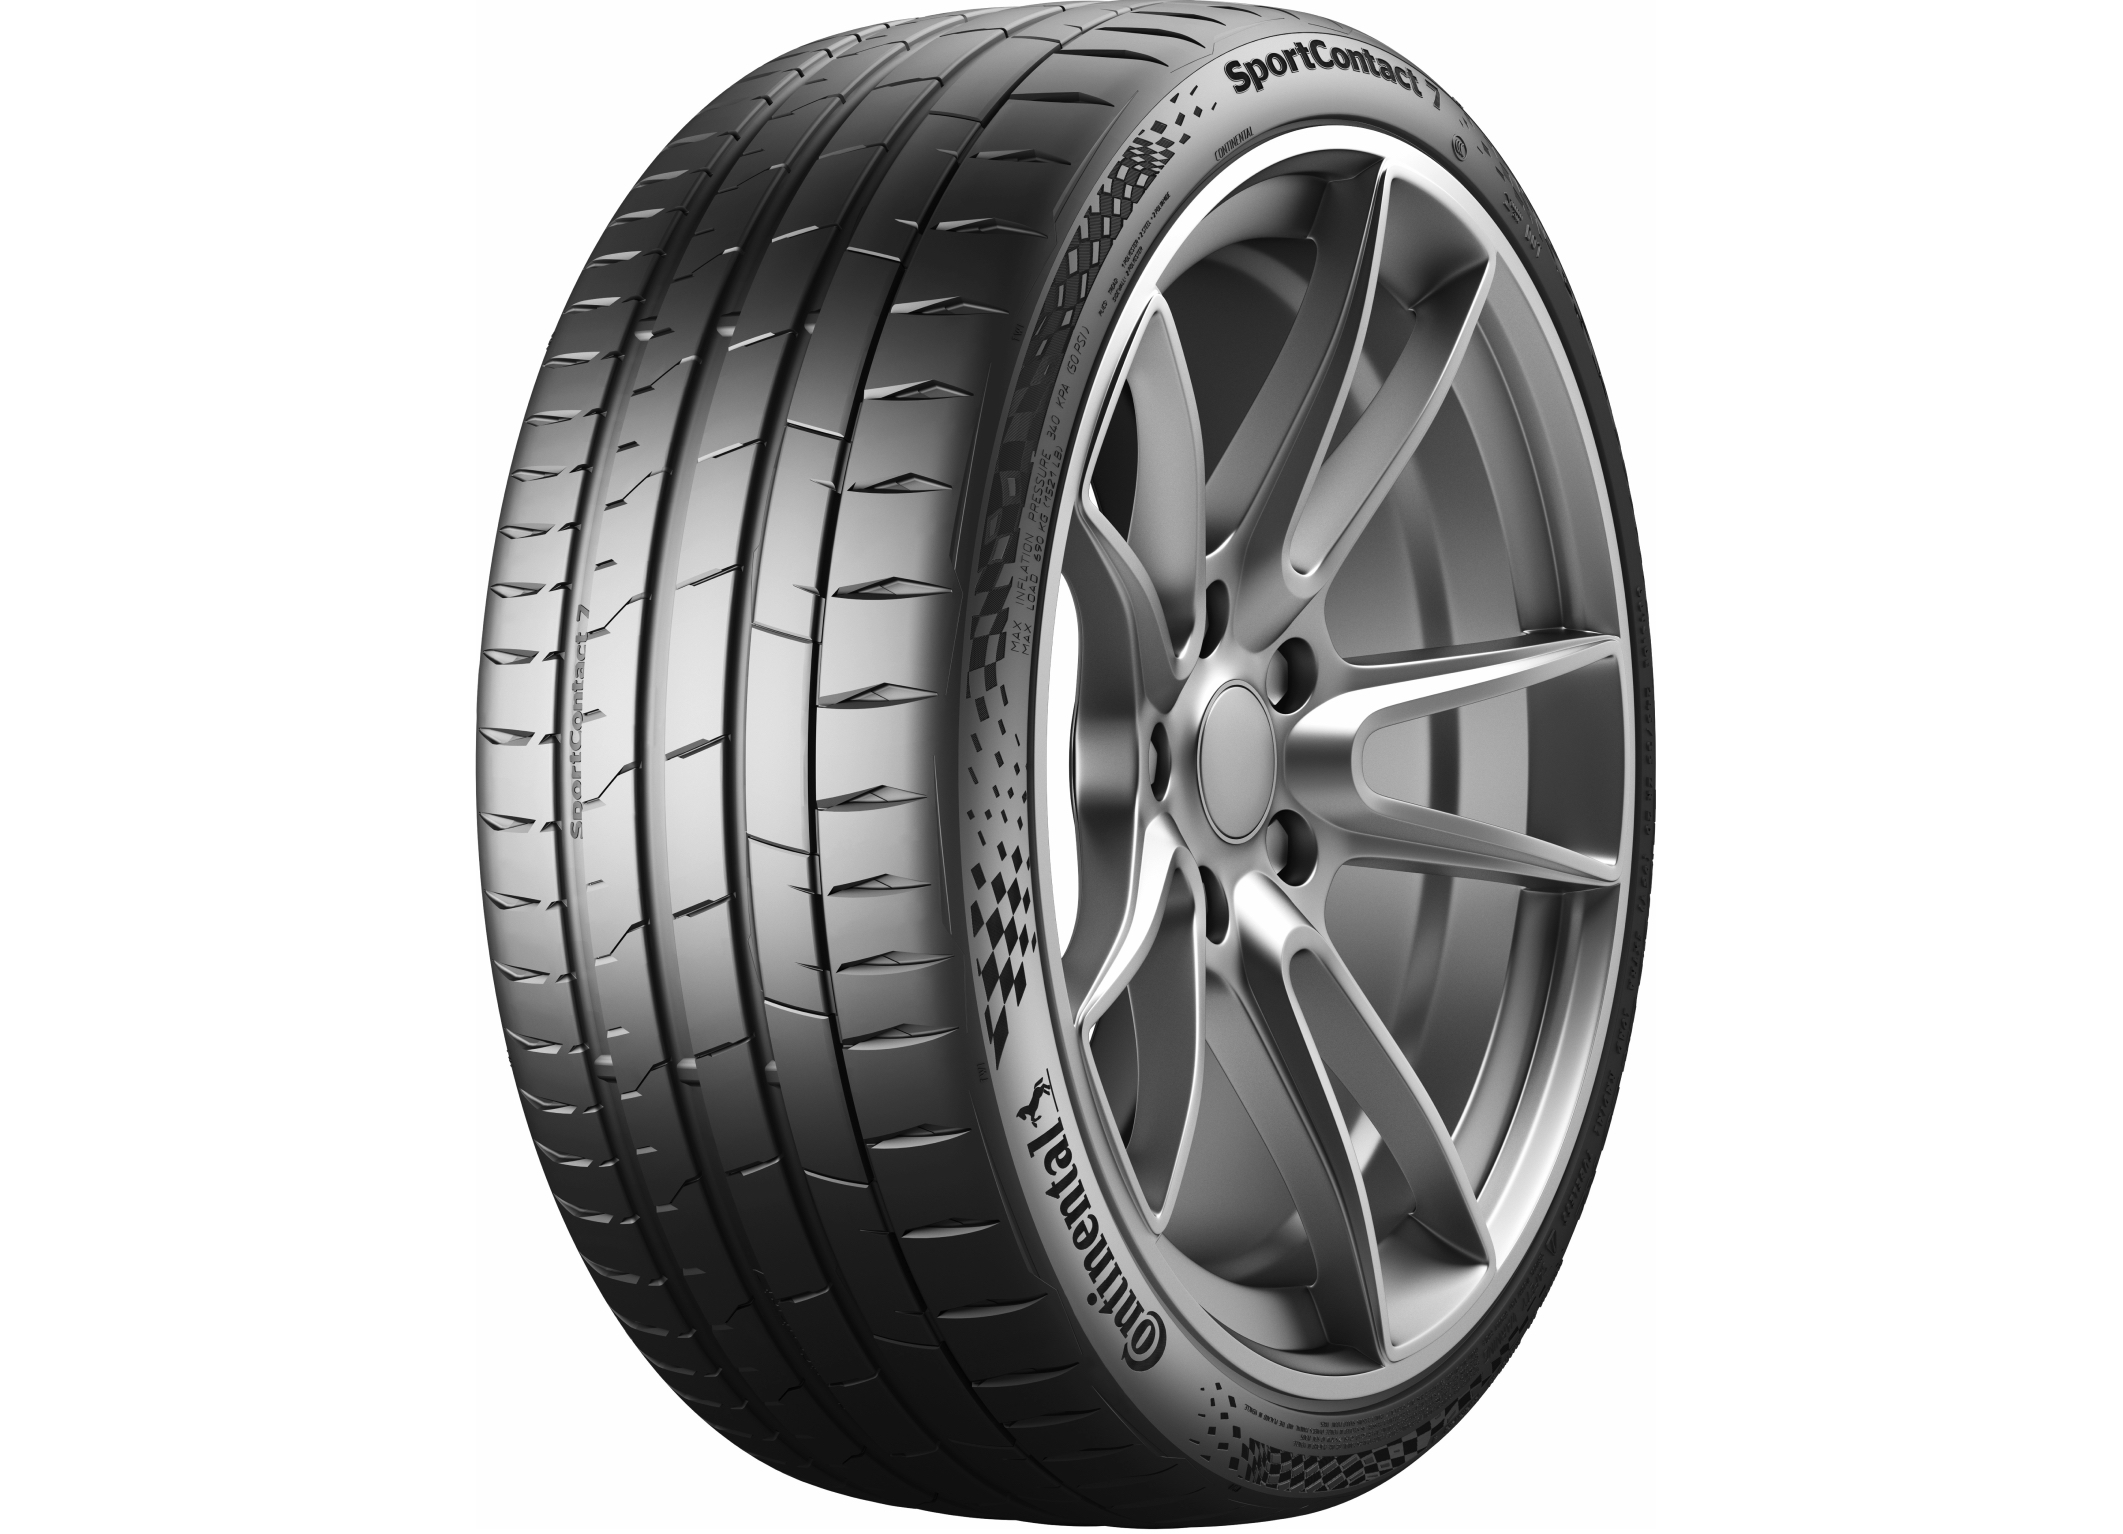 Continental Brabus tire - AG supercar yet powerful supplier Continental the for is the exclusive most